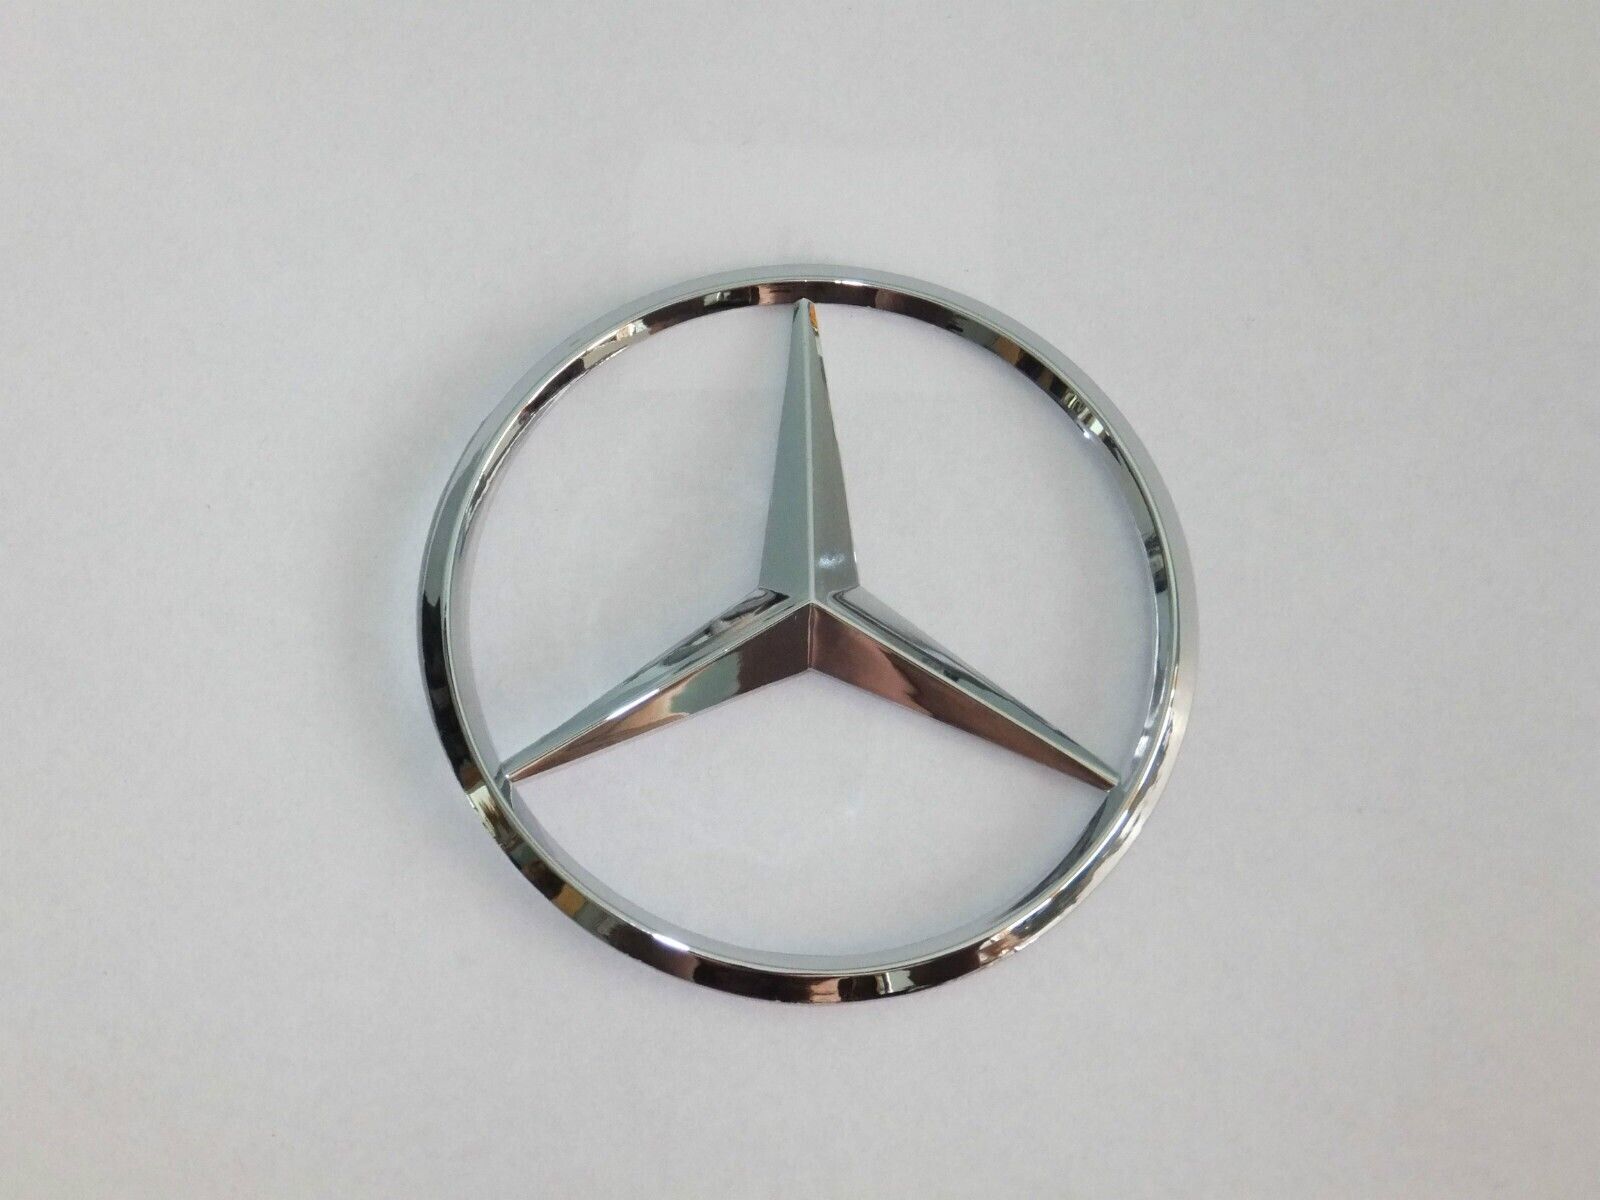 New for Mercedes Benz Chrome Star Trunk Emblem Badge 75mm - Free US Shipping